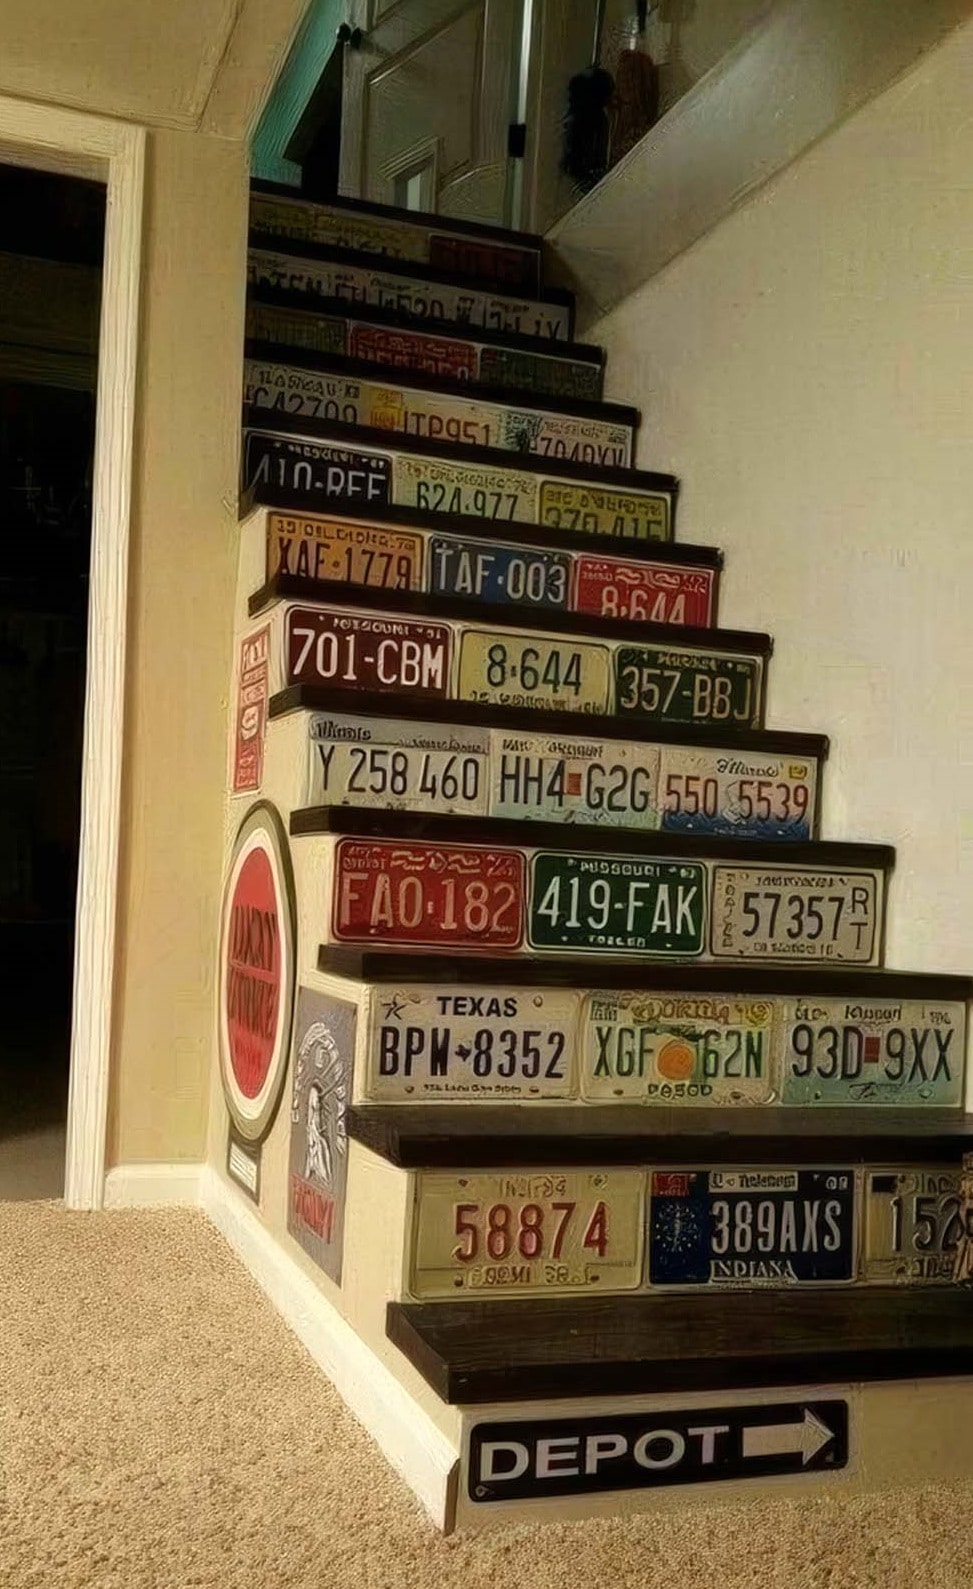 License plates decorating stairs to basement